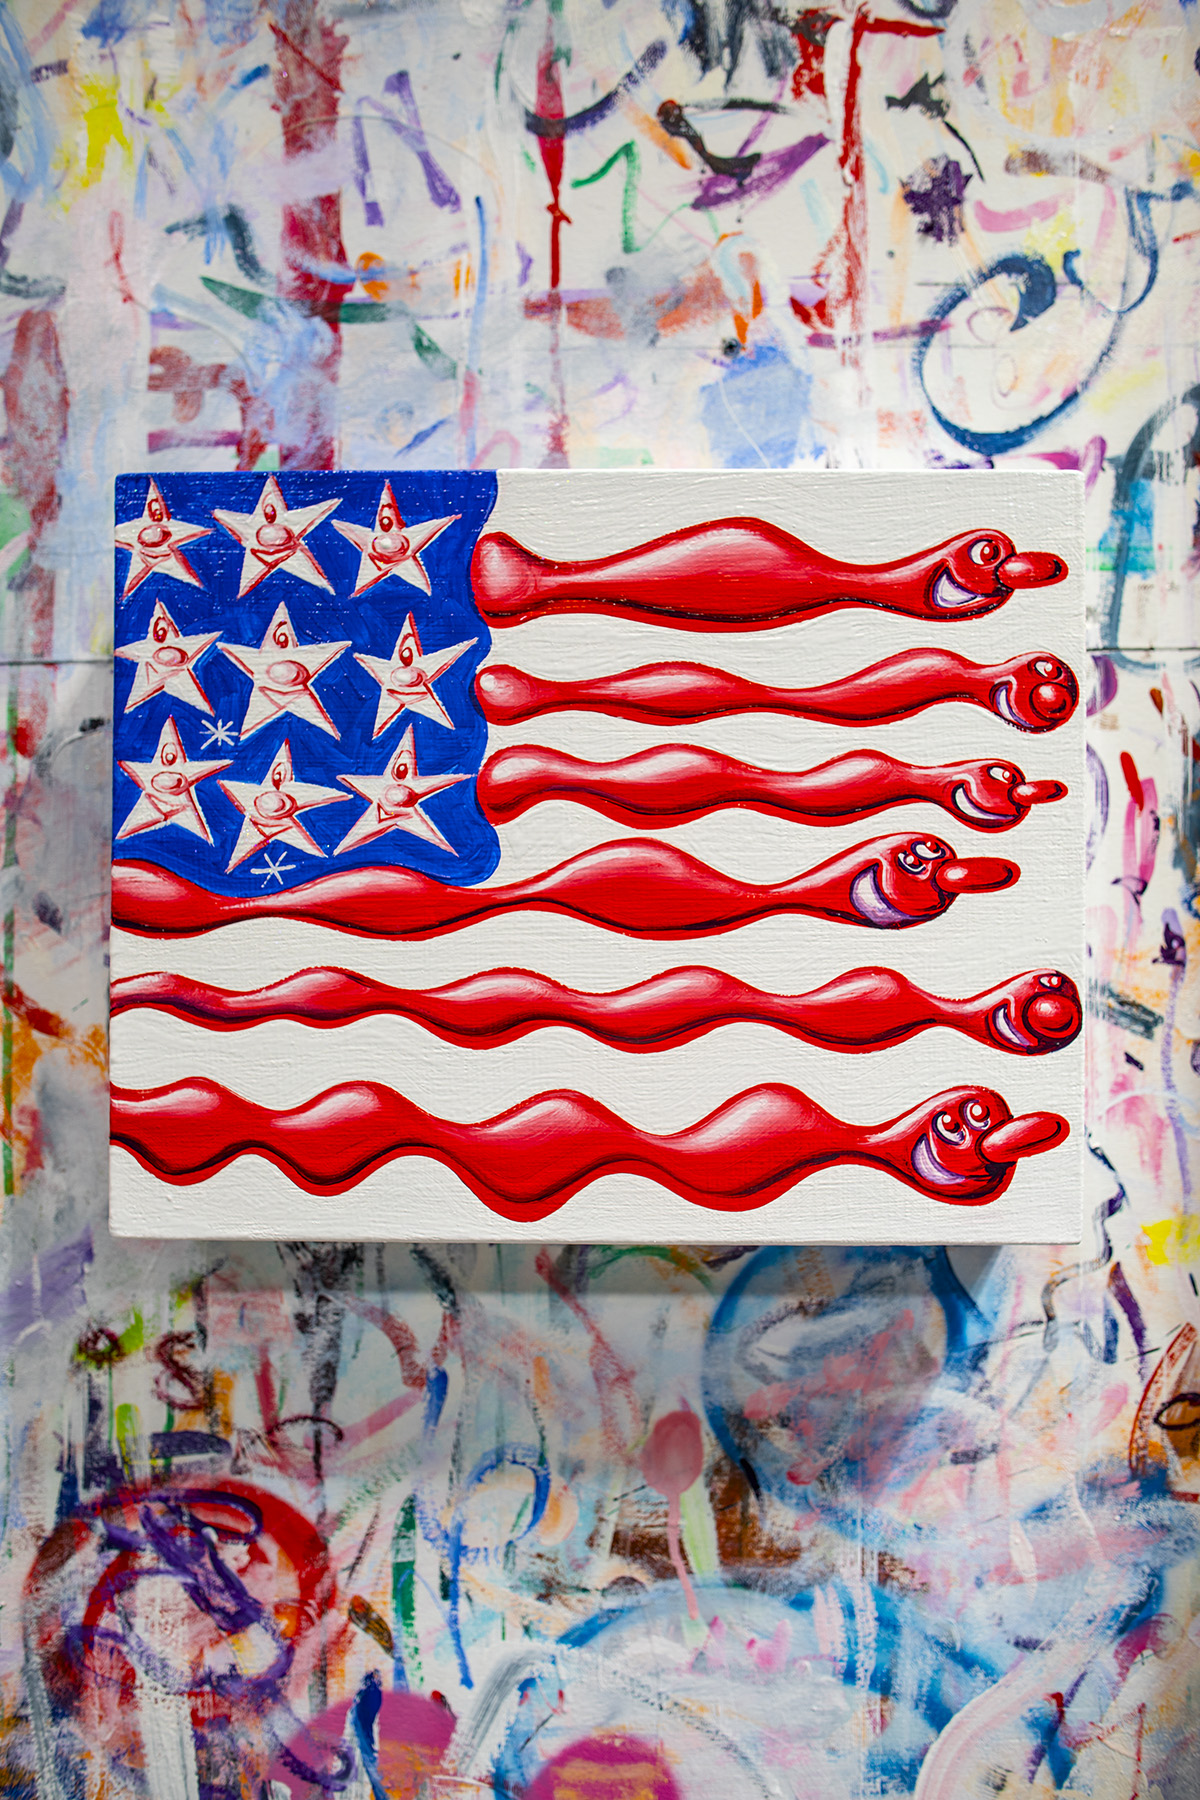 Pop art version of the american flag by artist Kenny Scharf